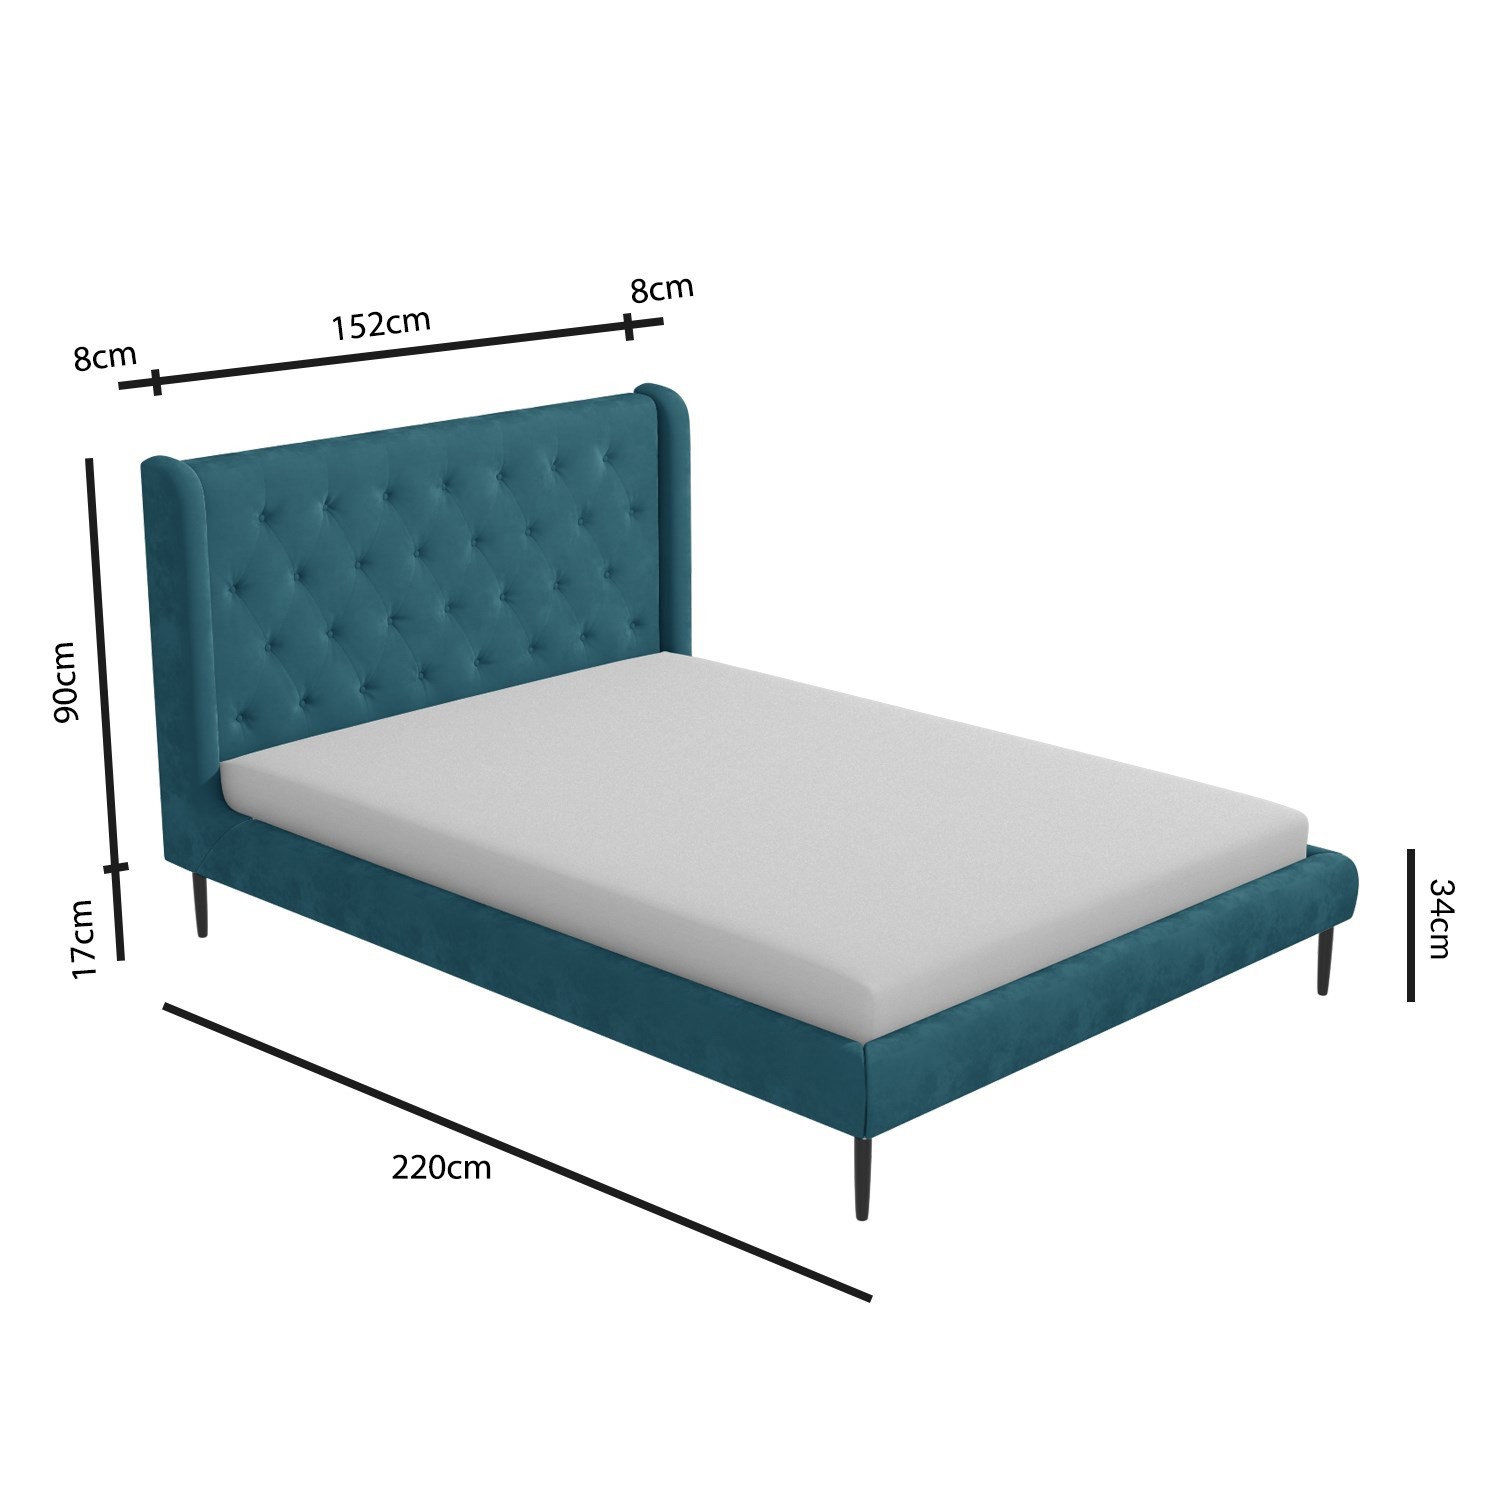 Teal Velvet King Size Bed Frame With, King Size Bed Headboard Dimensions